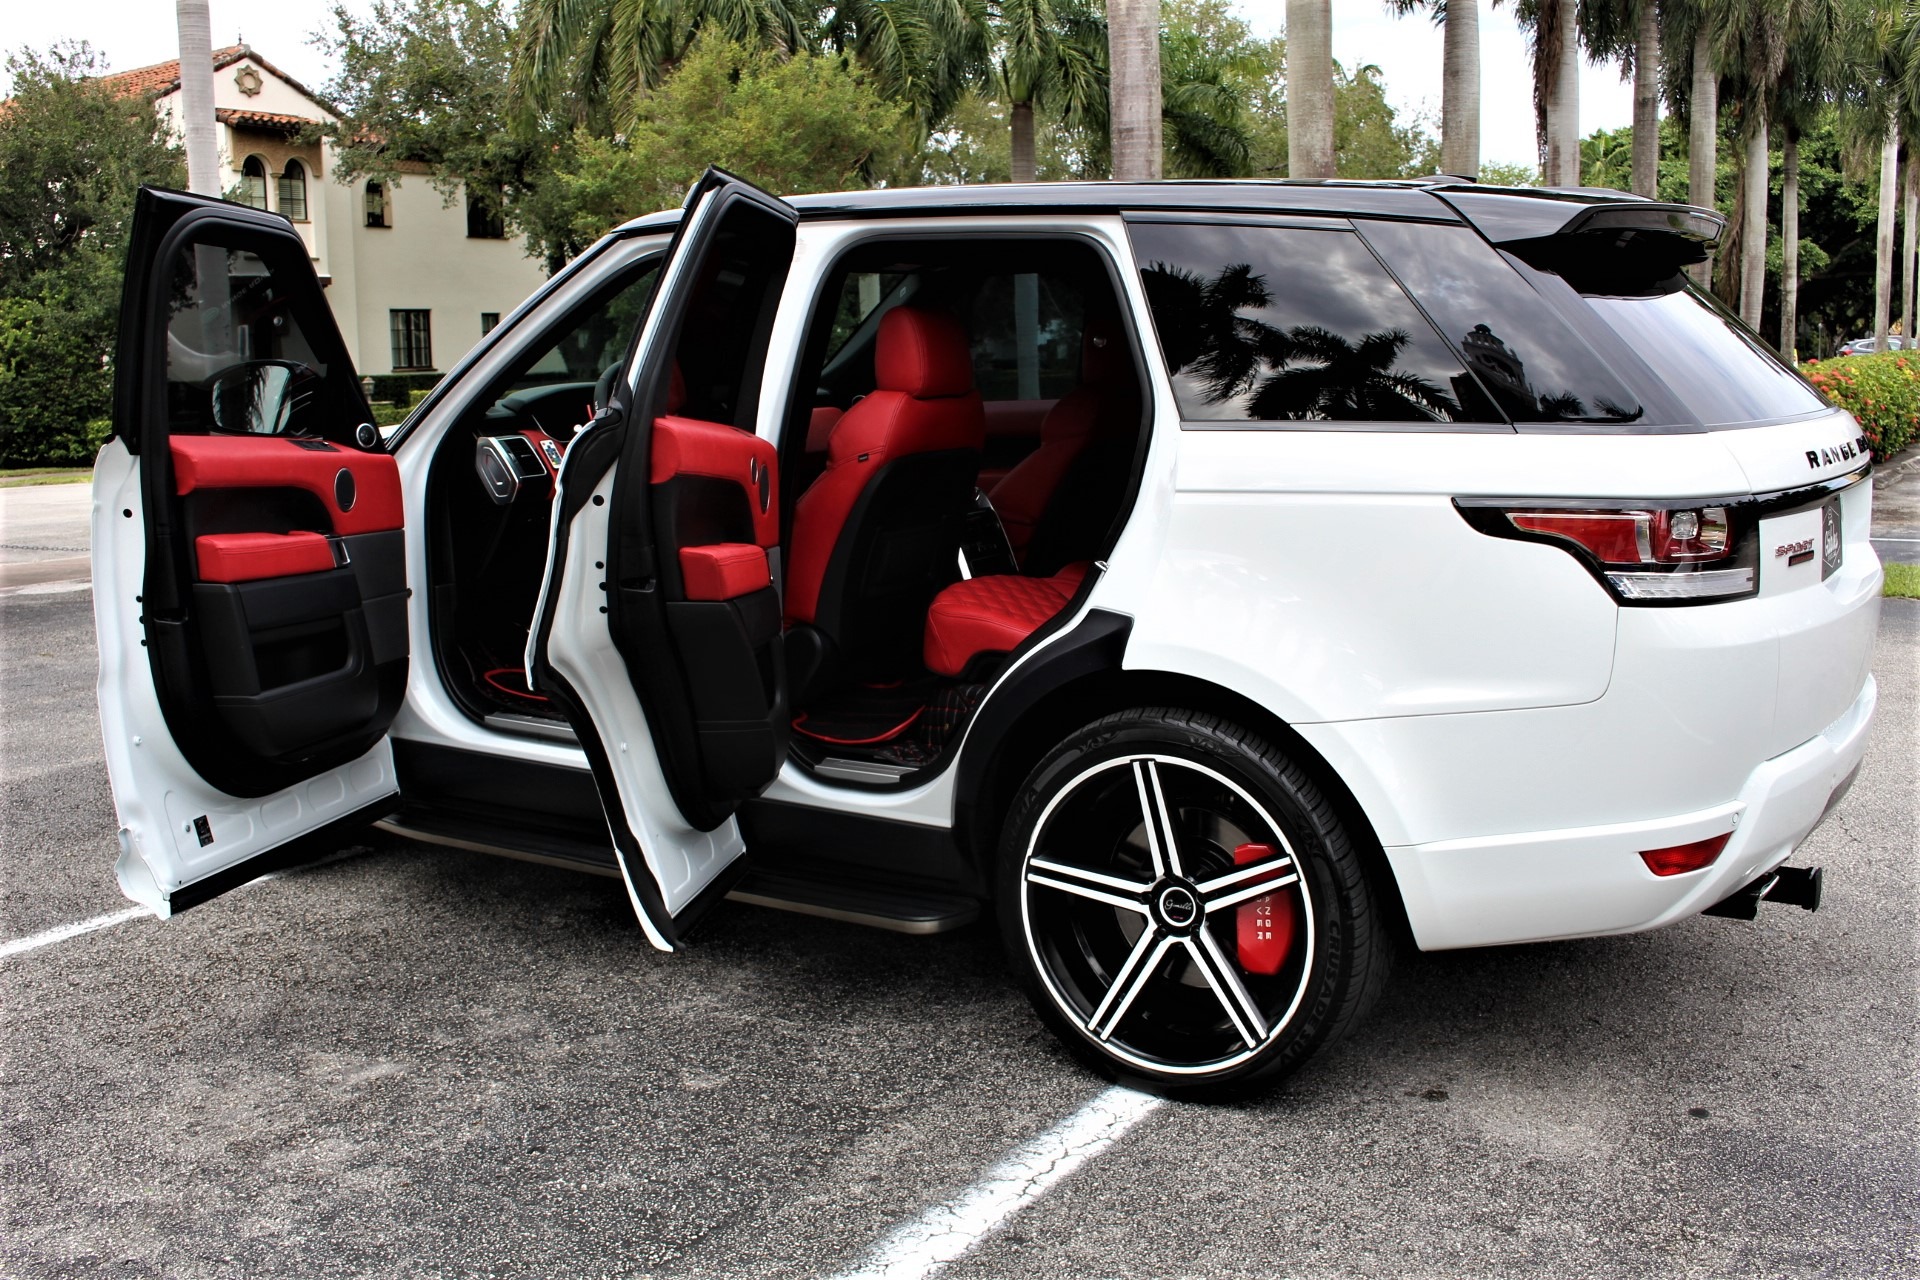 Used 2015 Land Rover Range Rover Sport HSE for sale Sold at The Gables Sports Cars in Miami FL 33146 1